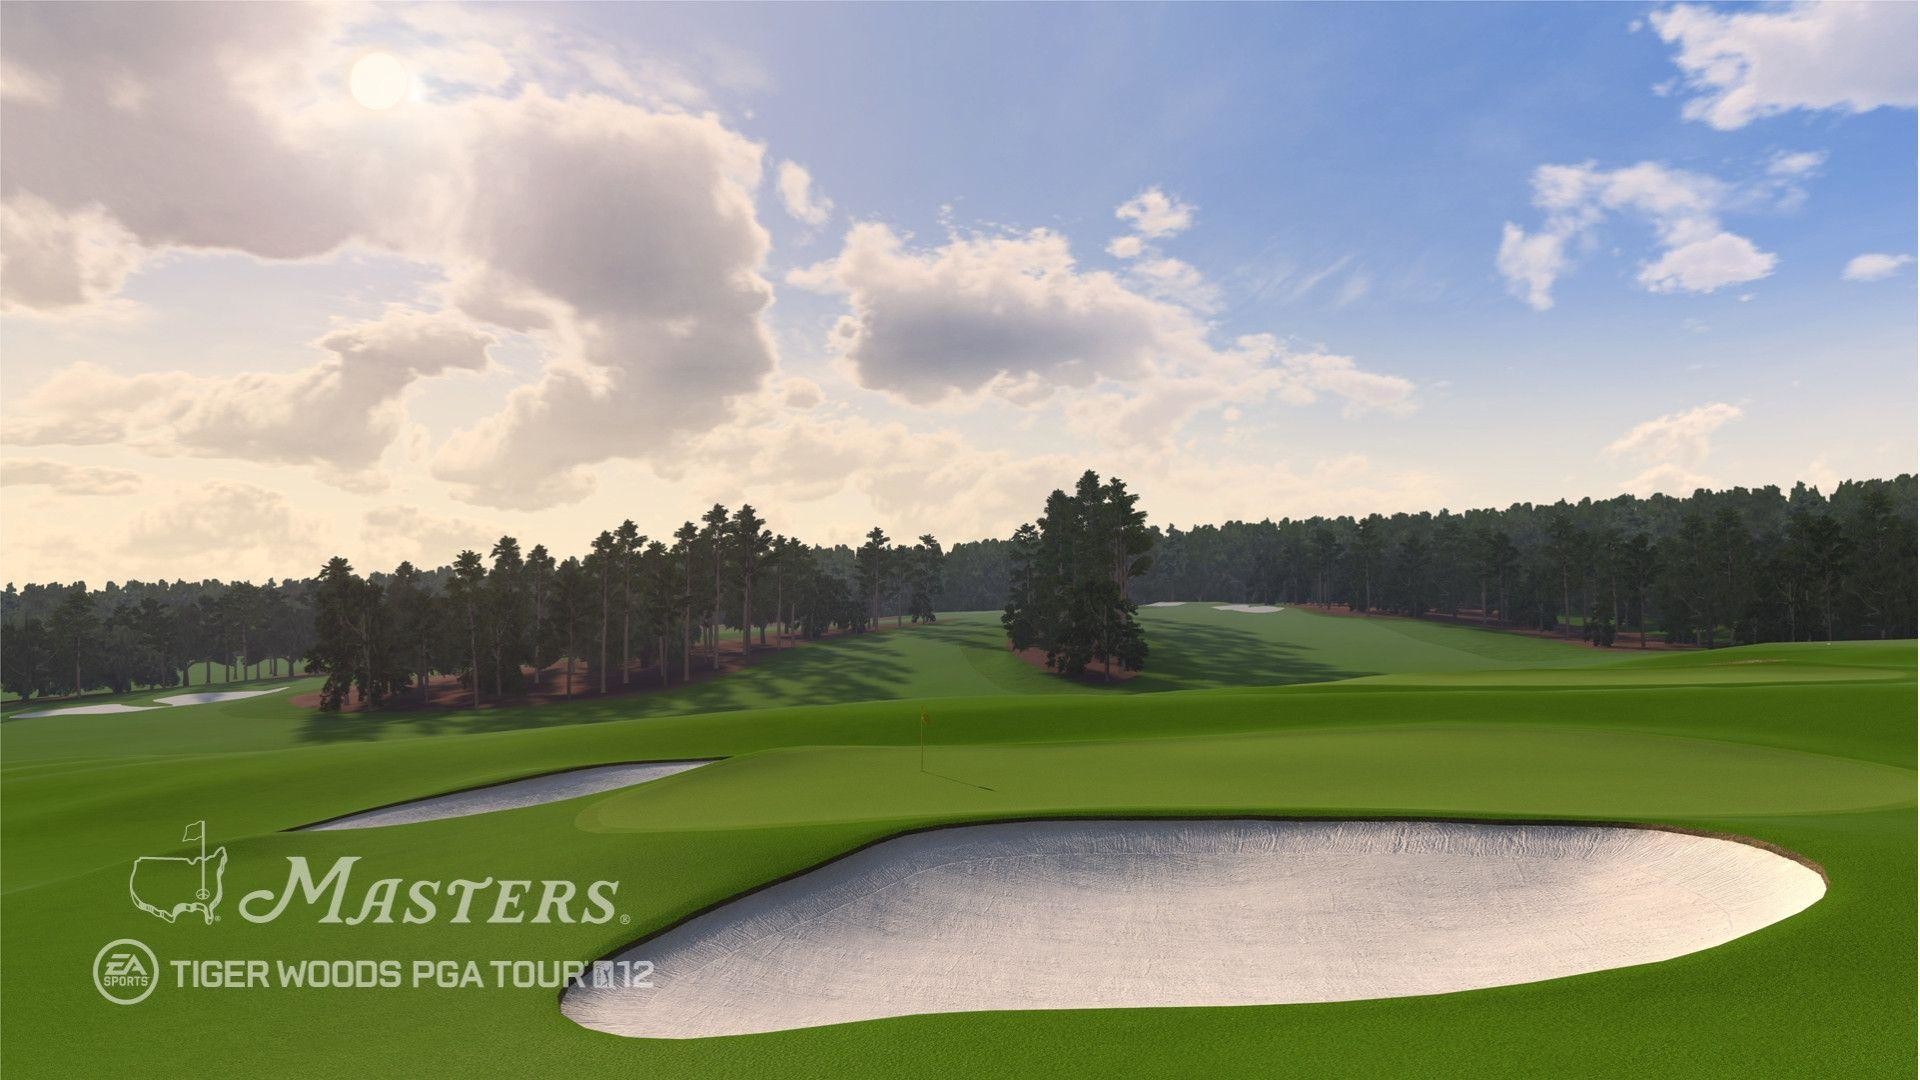 1920x1080 Tiger Woods PGA Tour 12 gets demo release from March 8 | VG247